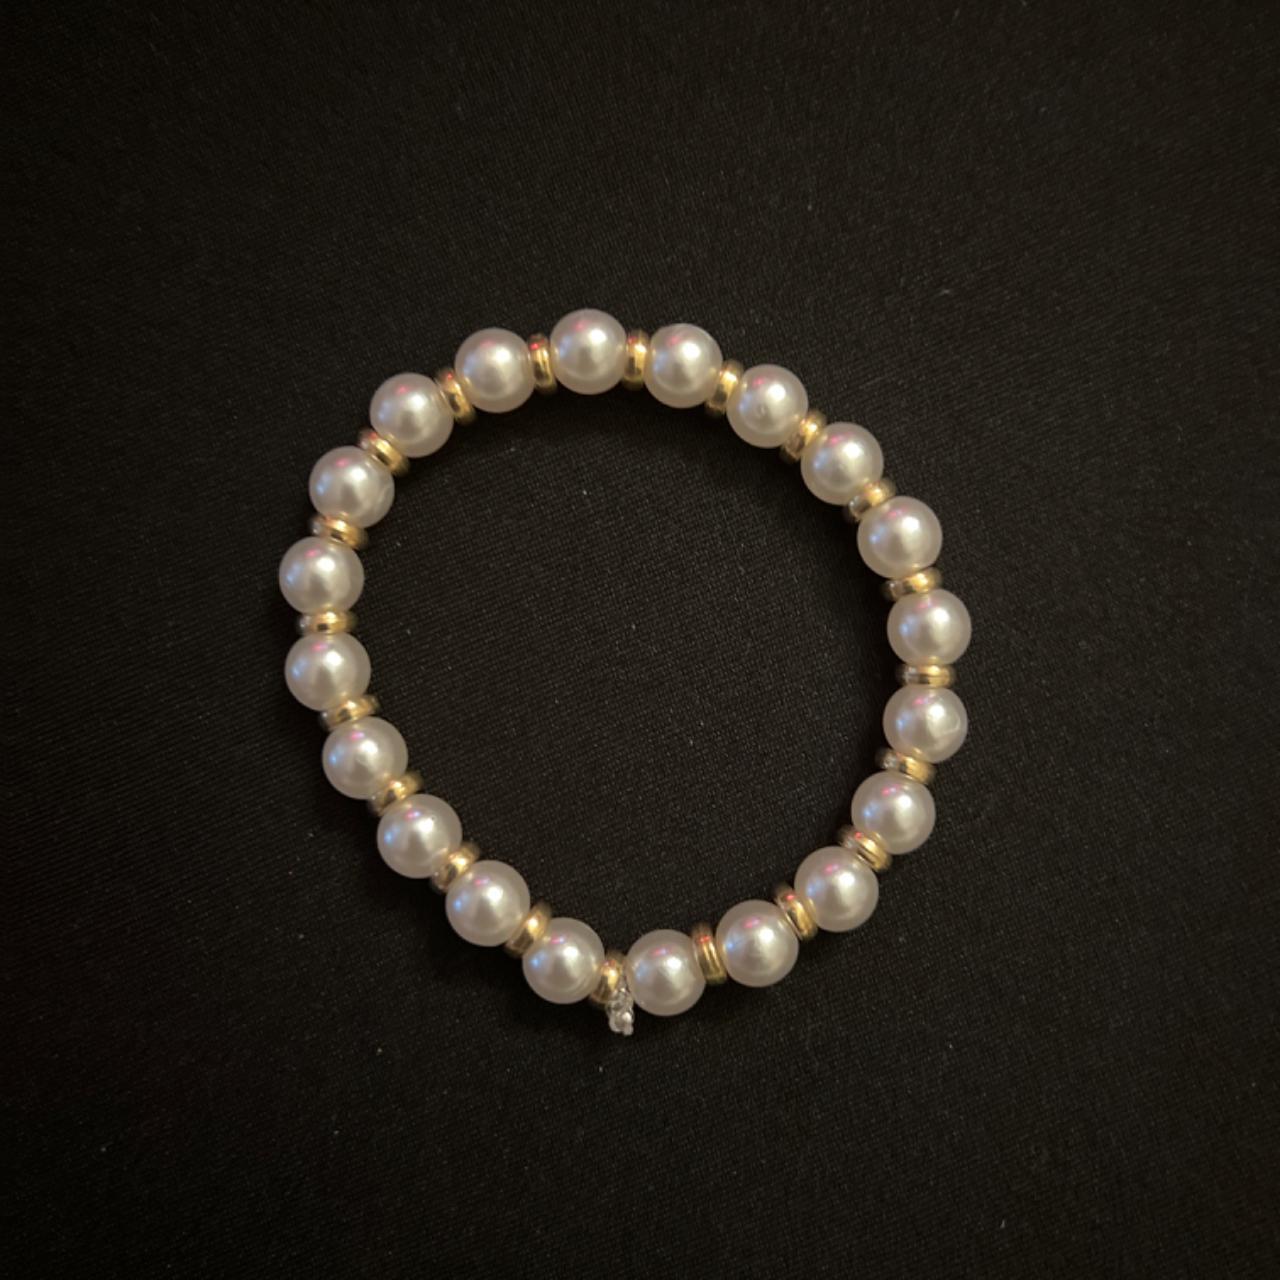 A pearl bracelet with gold flat beads - Depop